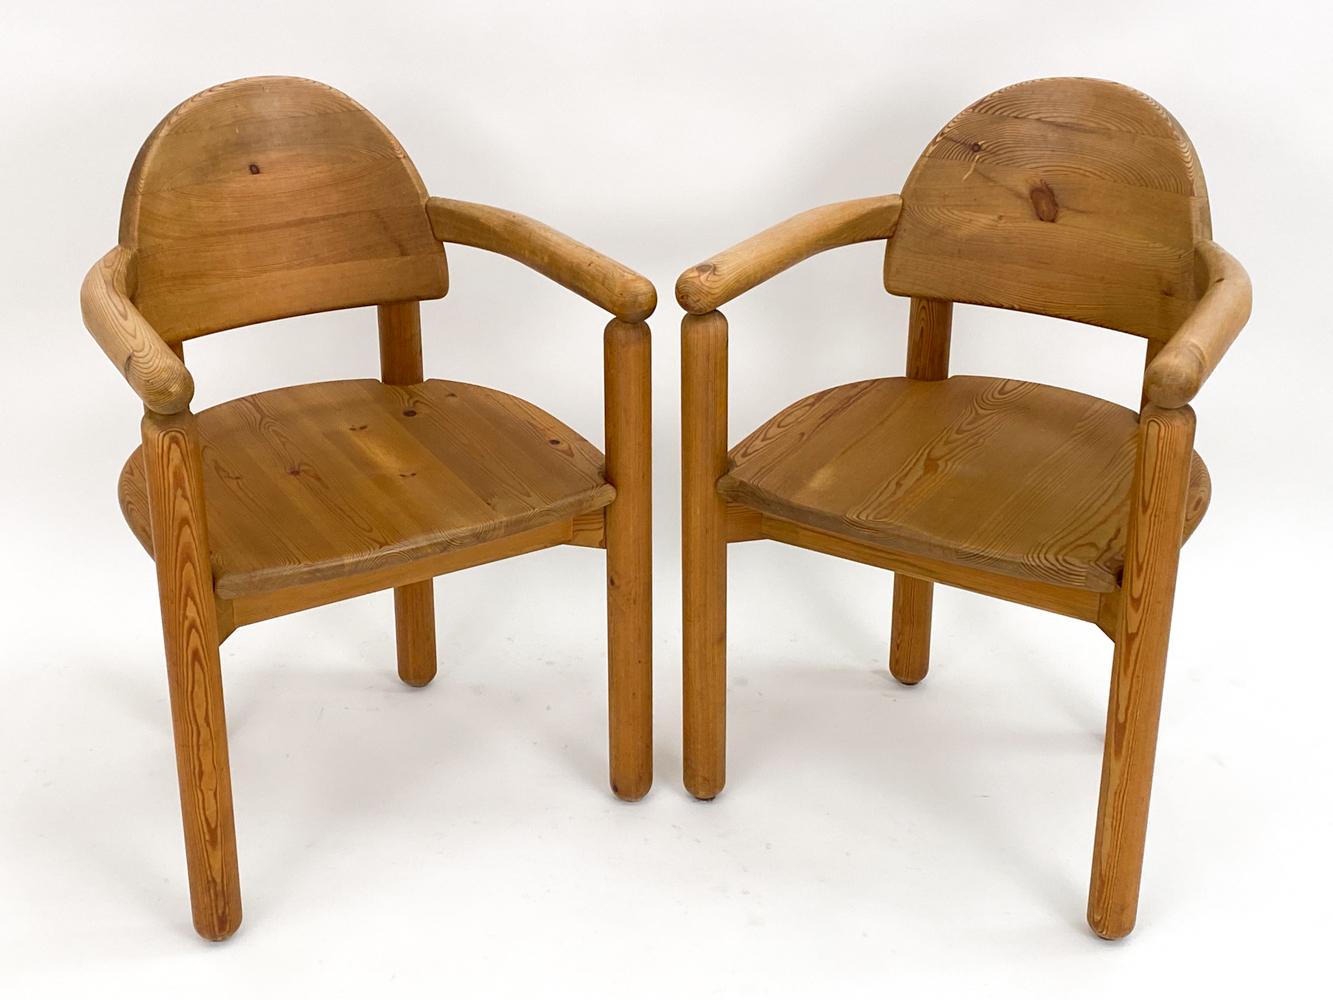 Rainer Daumiller's Pine Armchairs, crafted in Denmark circa 1980, are a harmonious blend of raw nature and refined design. Each chair feels as if it has been sculpted from the heart of a majestic pine, capturing the very essence and spirit of the